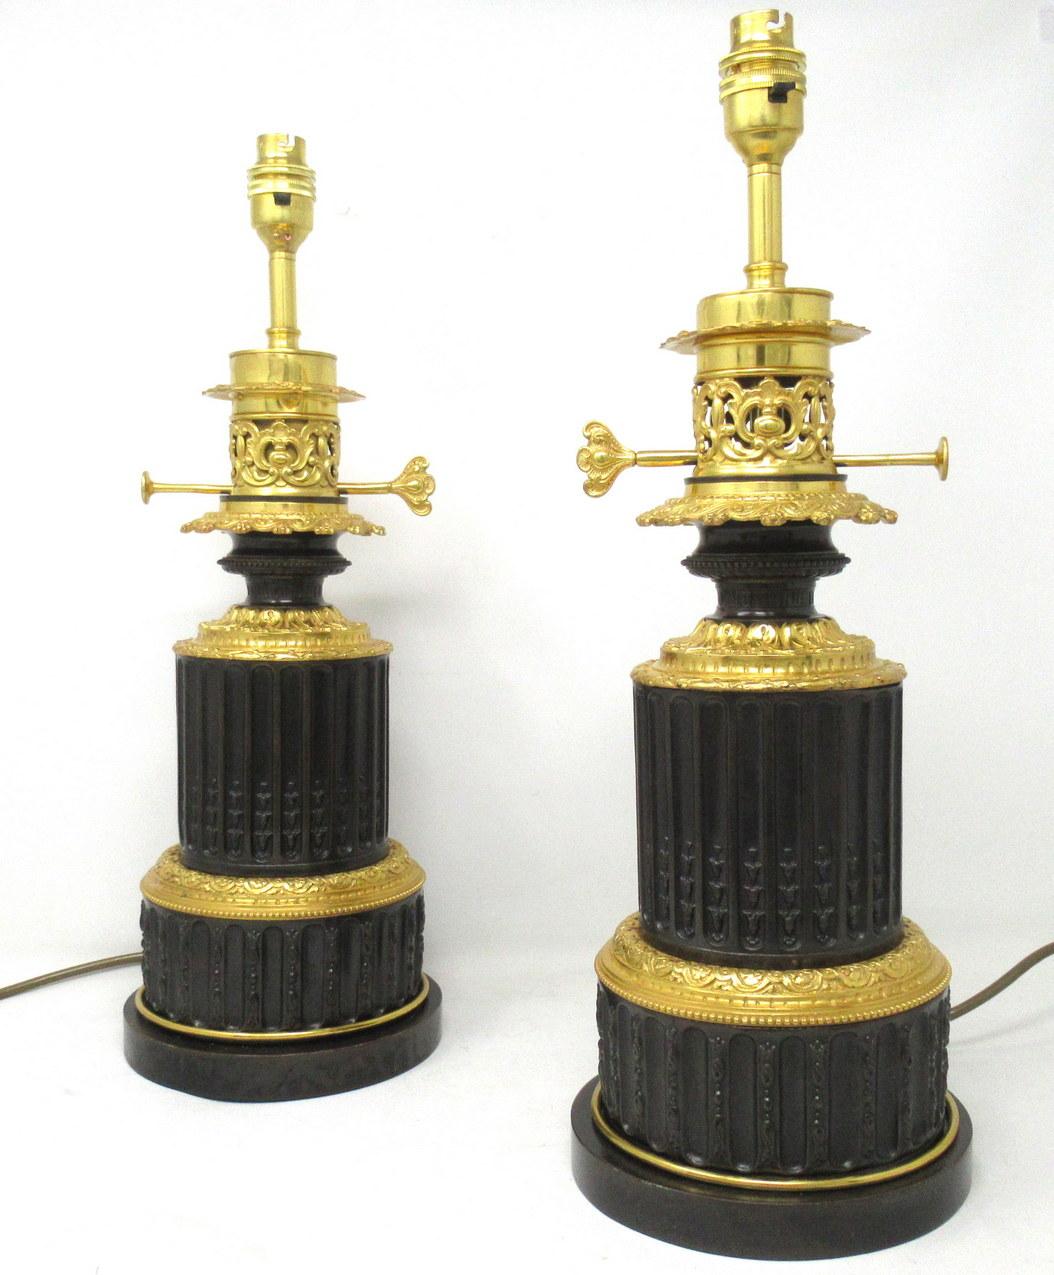 An exceptionally fine pair french finely cast patinated dark brown bronze fluid oil table lamps of generous proportions, depicting an all-round fluted detail central body with stylish beaded rims, now converted to electricity.

The original ormolu